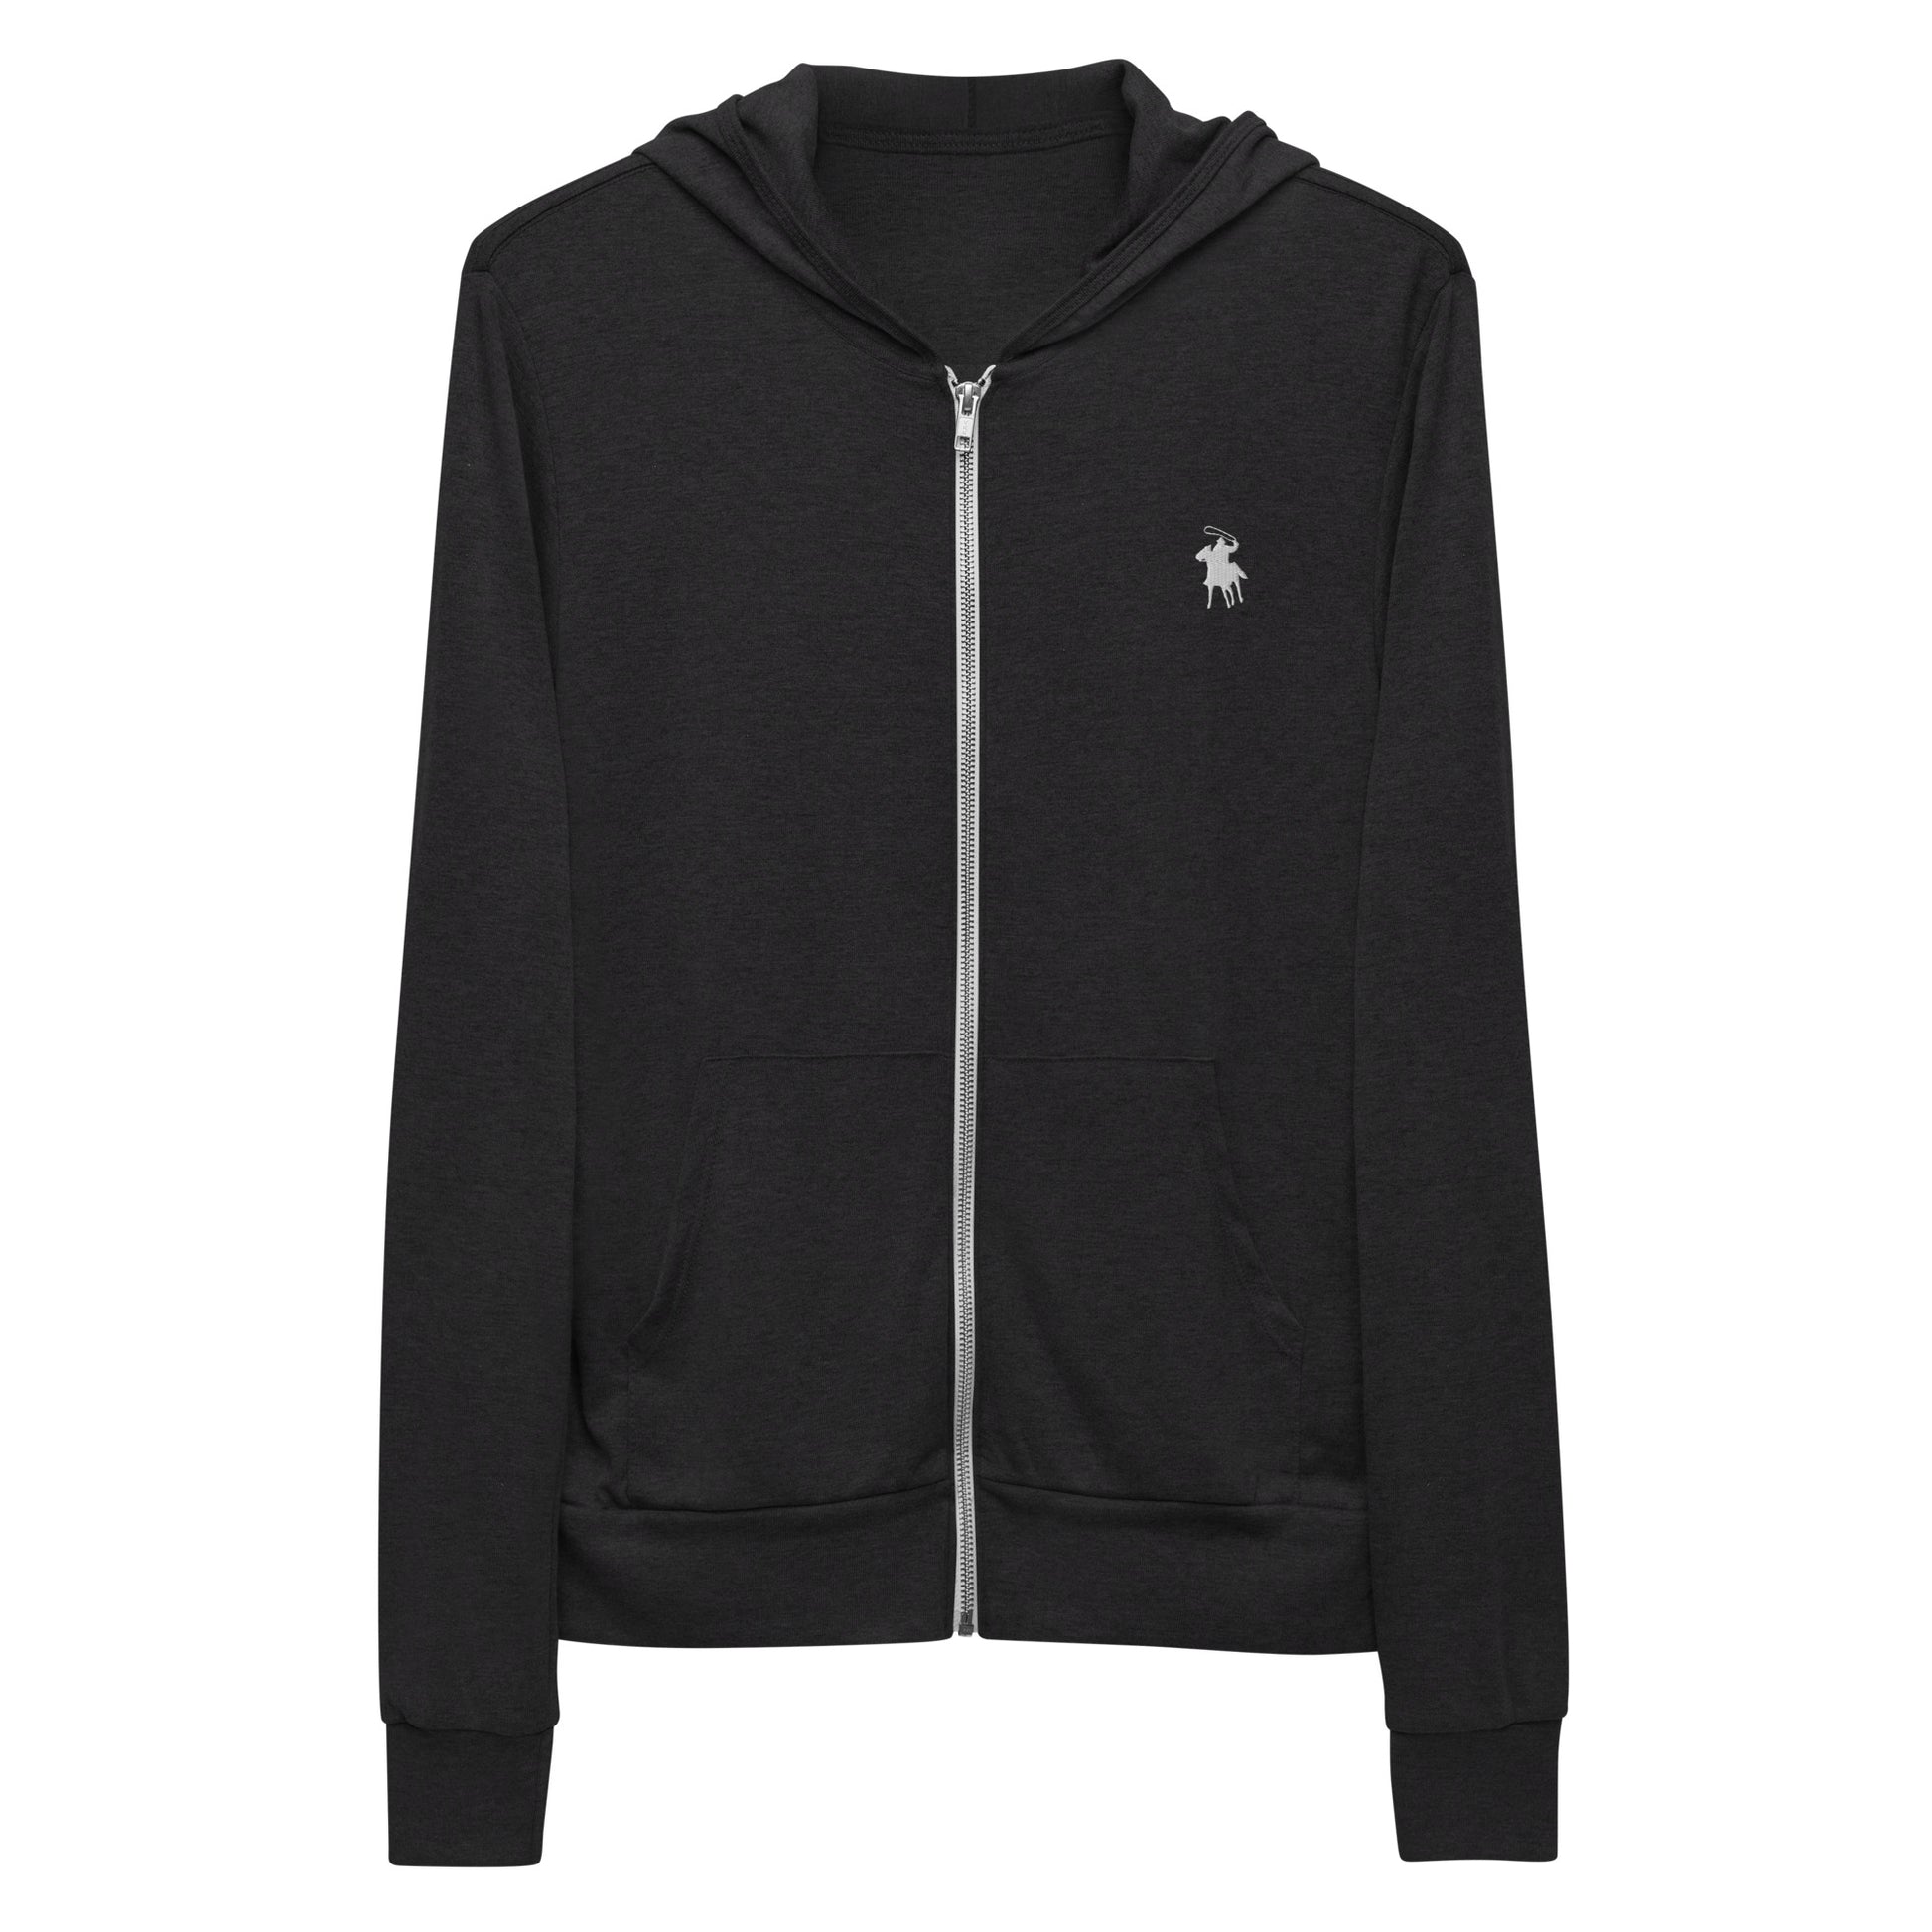 Country Polo Zip Hoodie (Charcoal Black)